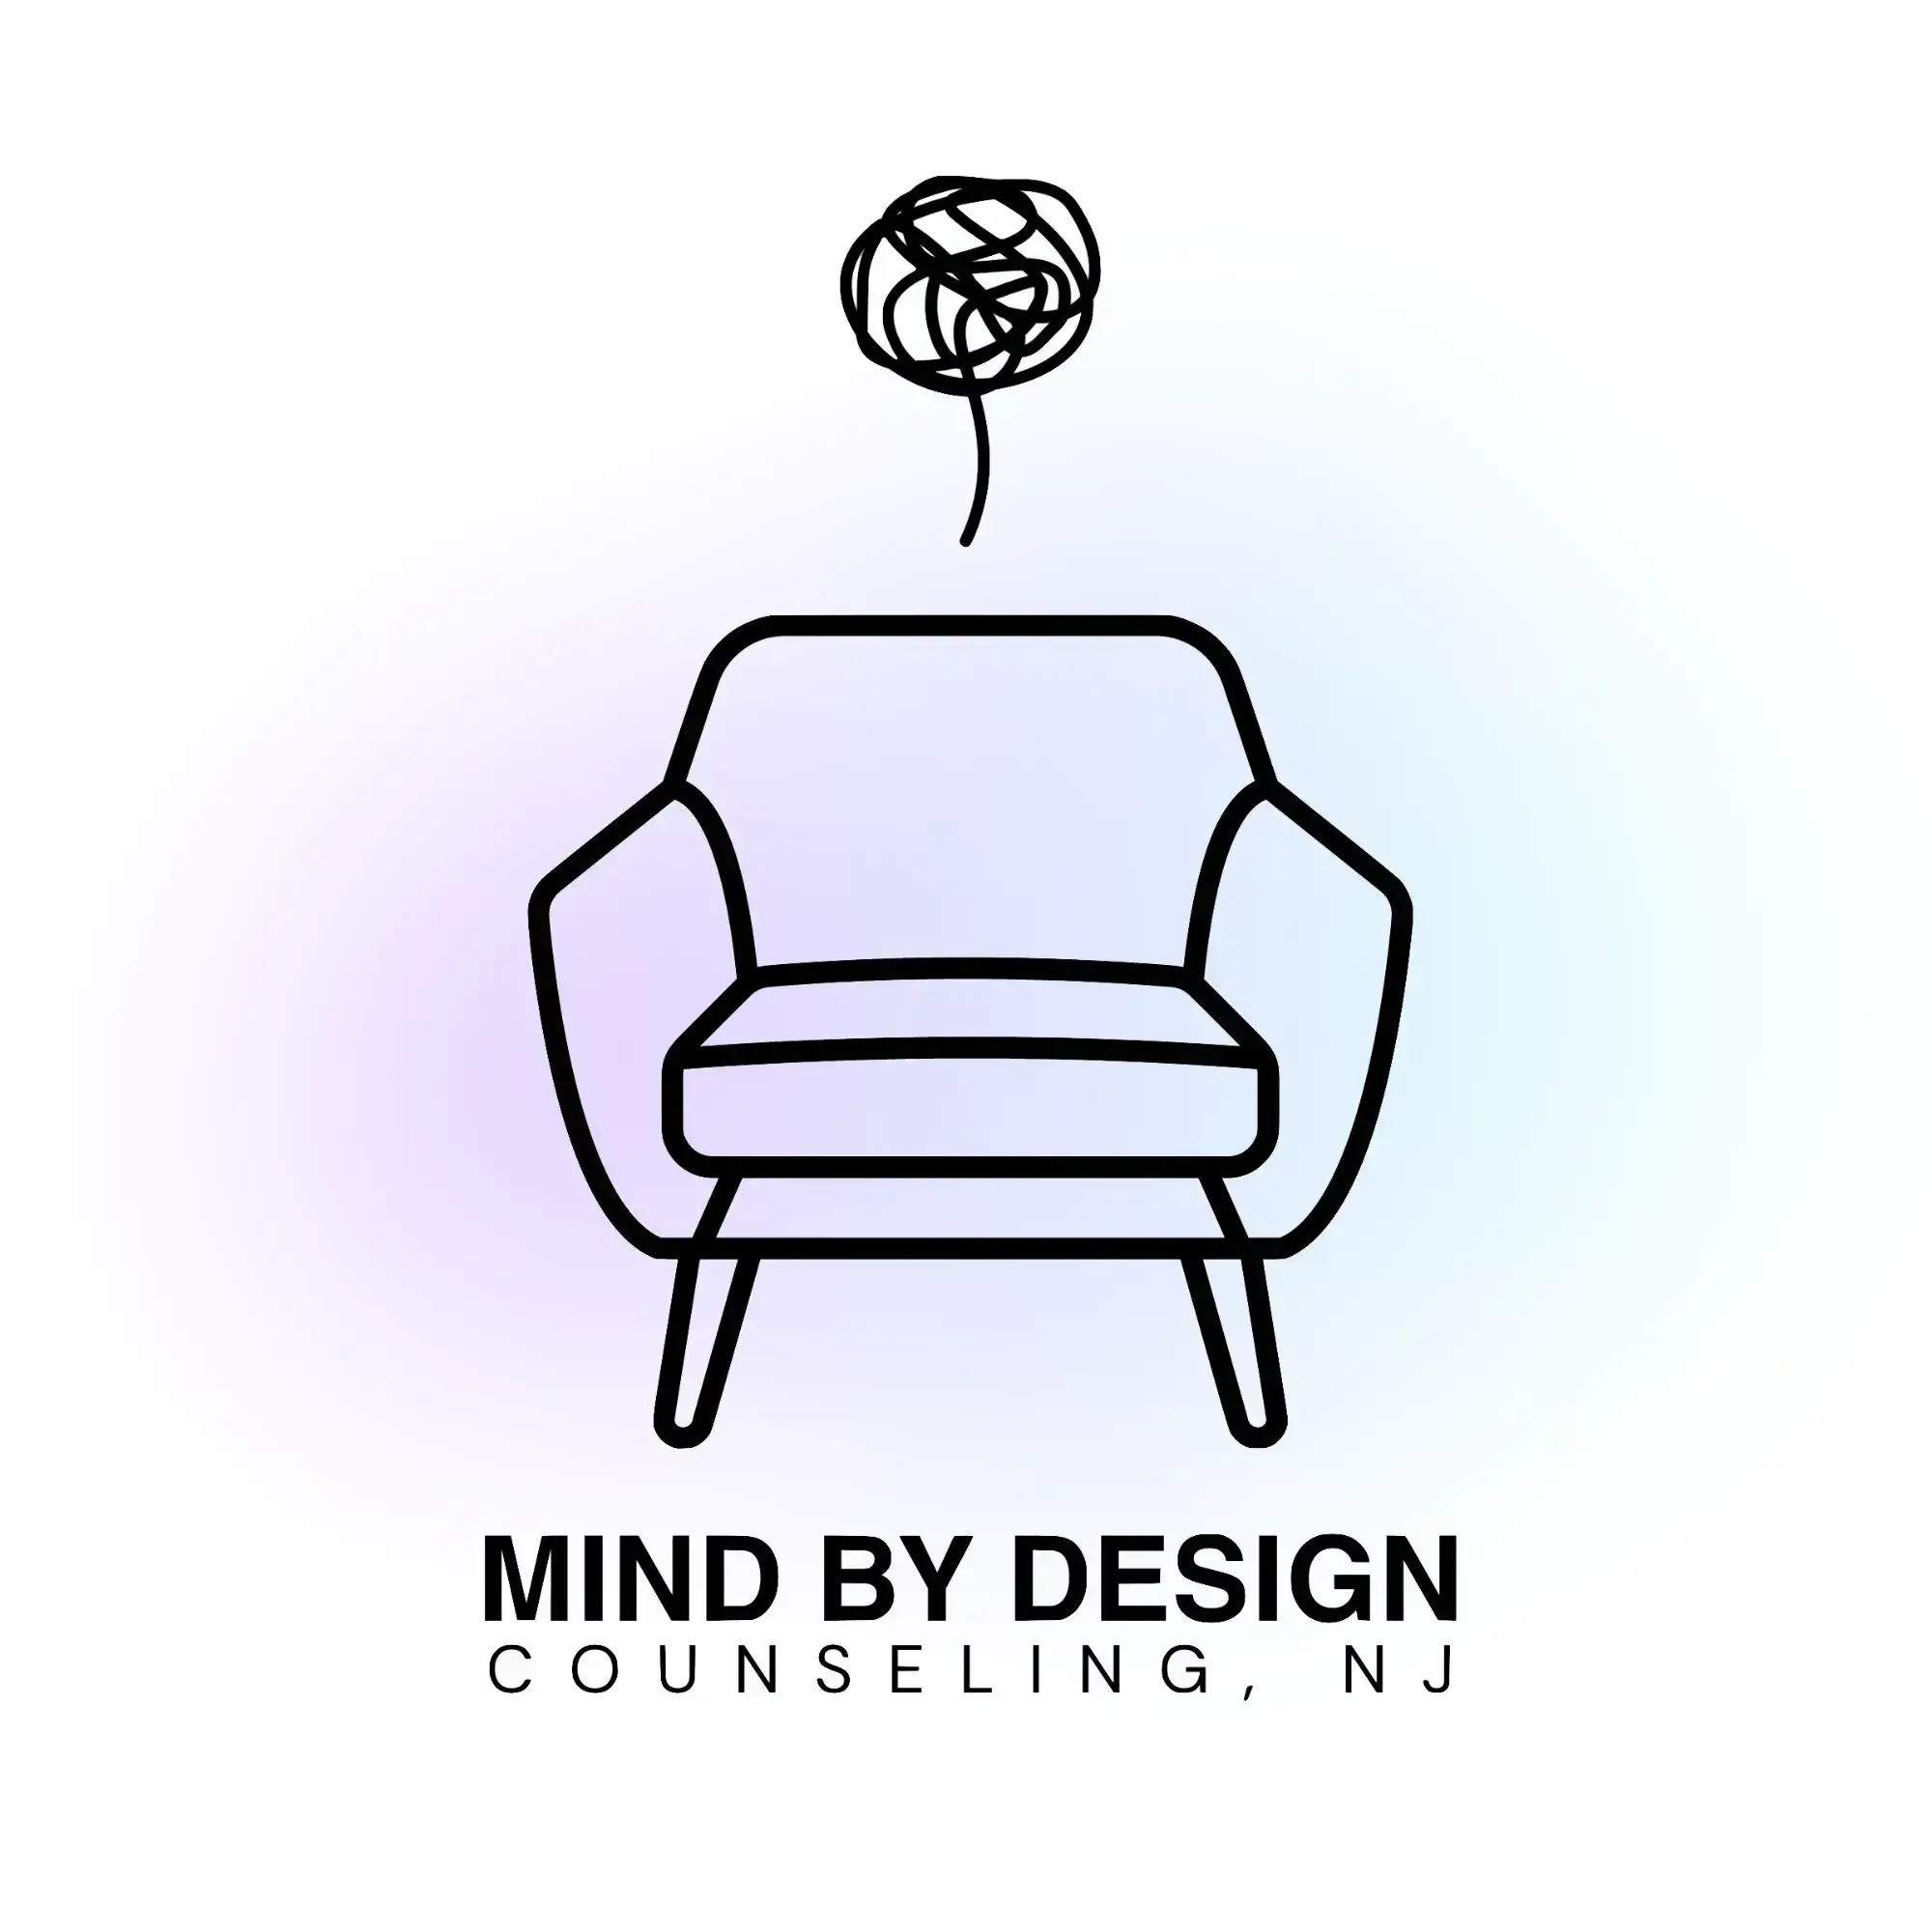 mind by design counseling online therapy in new jersey for anxiety, grief, women teens and adults NJ online therapist near me